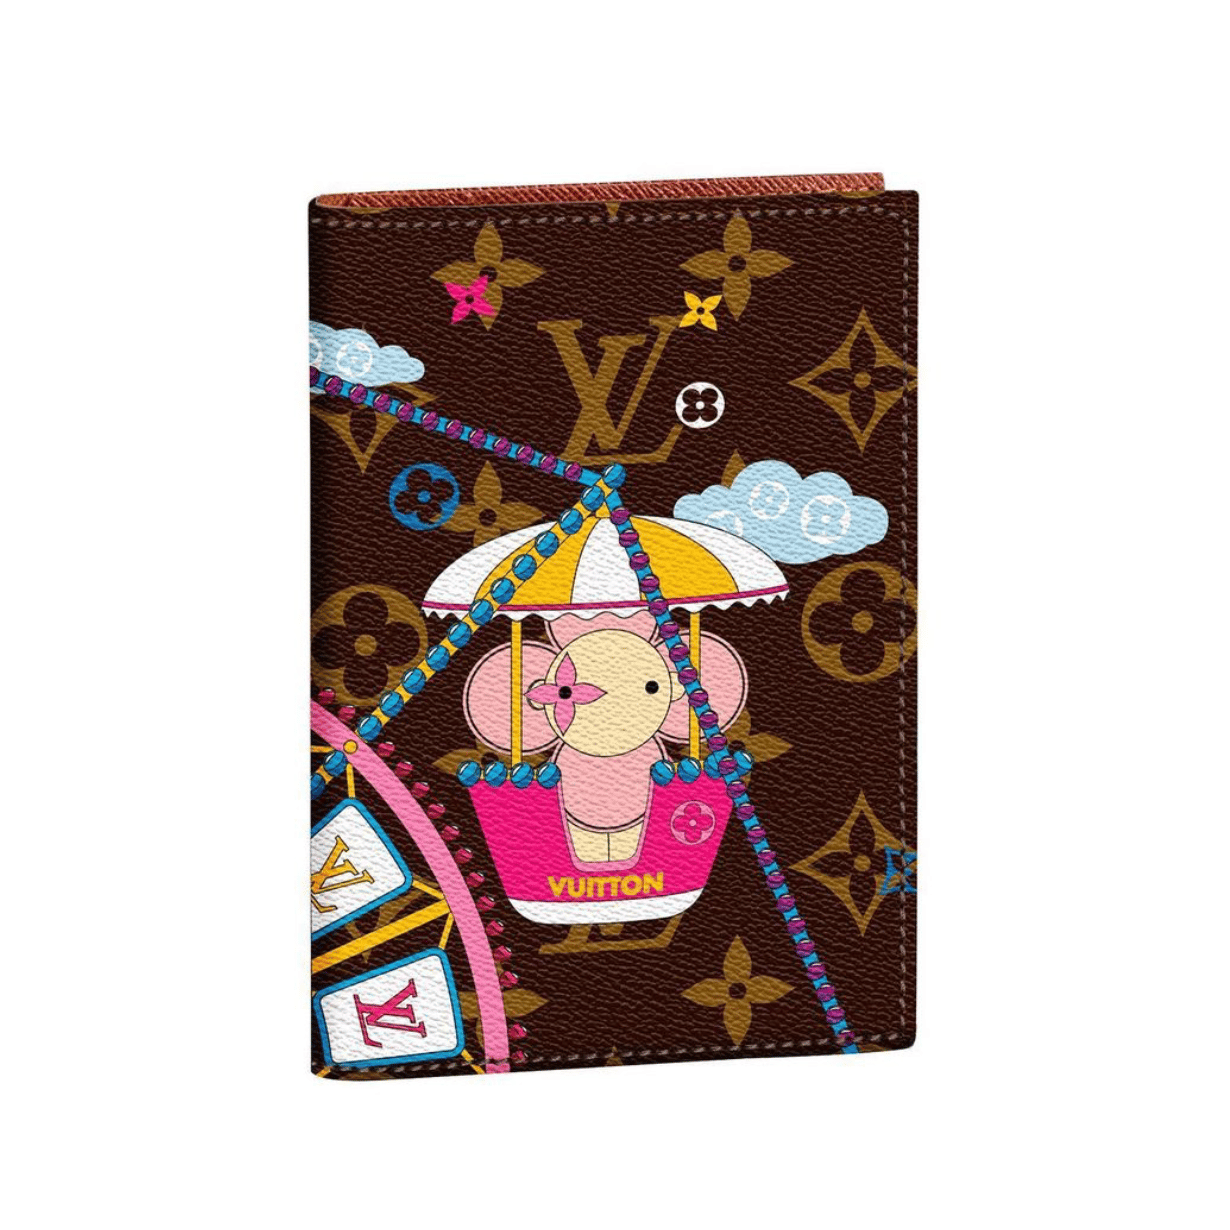 Louis Vuitton Vivienne Holiday Animation 2021 Limited Edition SLGs -  BagAddicts Anonymous